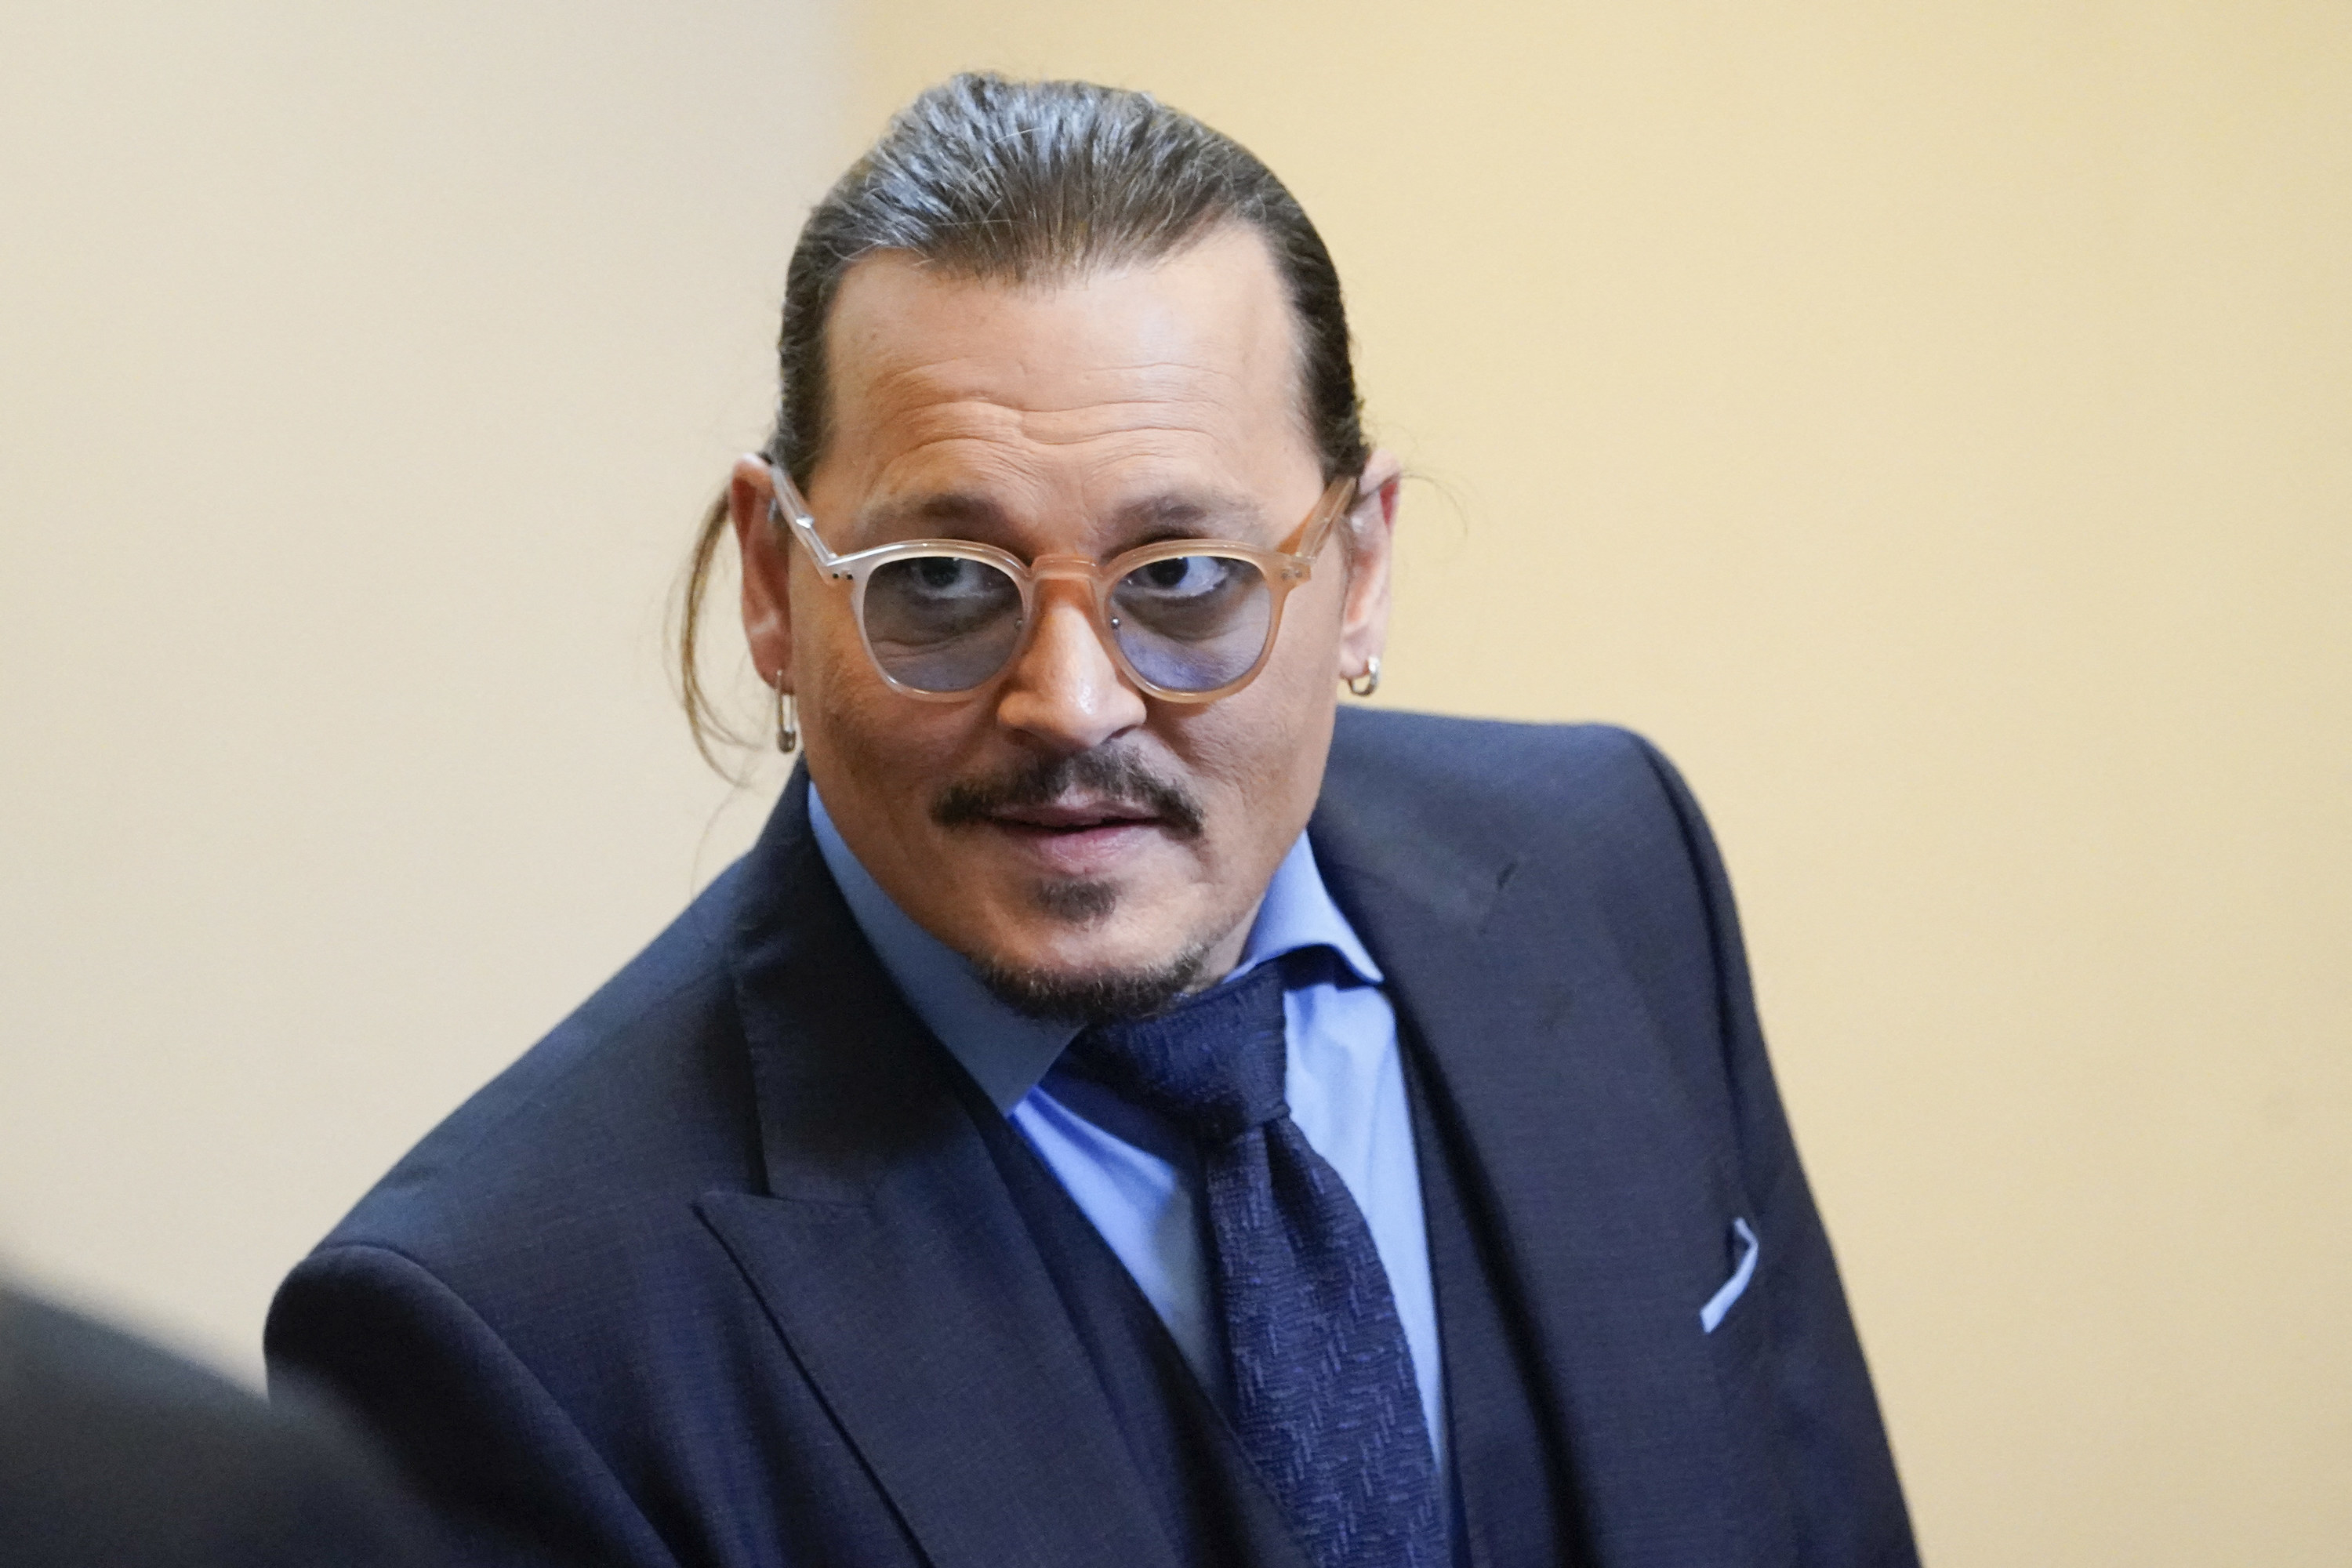 Johnny Depp appears in the courtroom at the Fairfax County Circuit Courthouse in Fairfax, Virginia, on May 27, 2022.